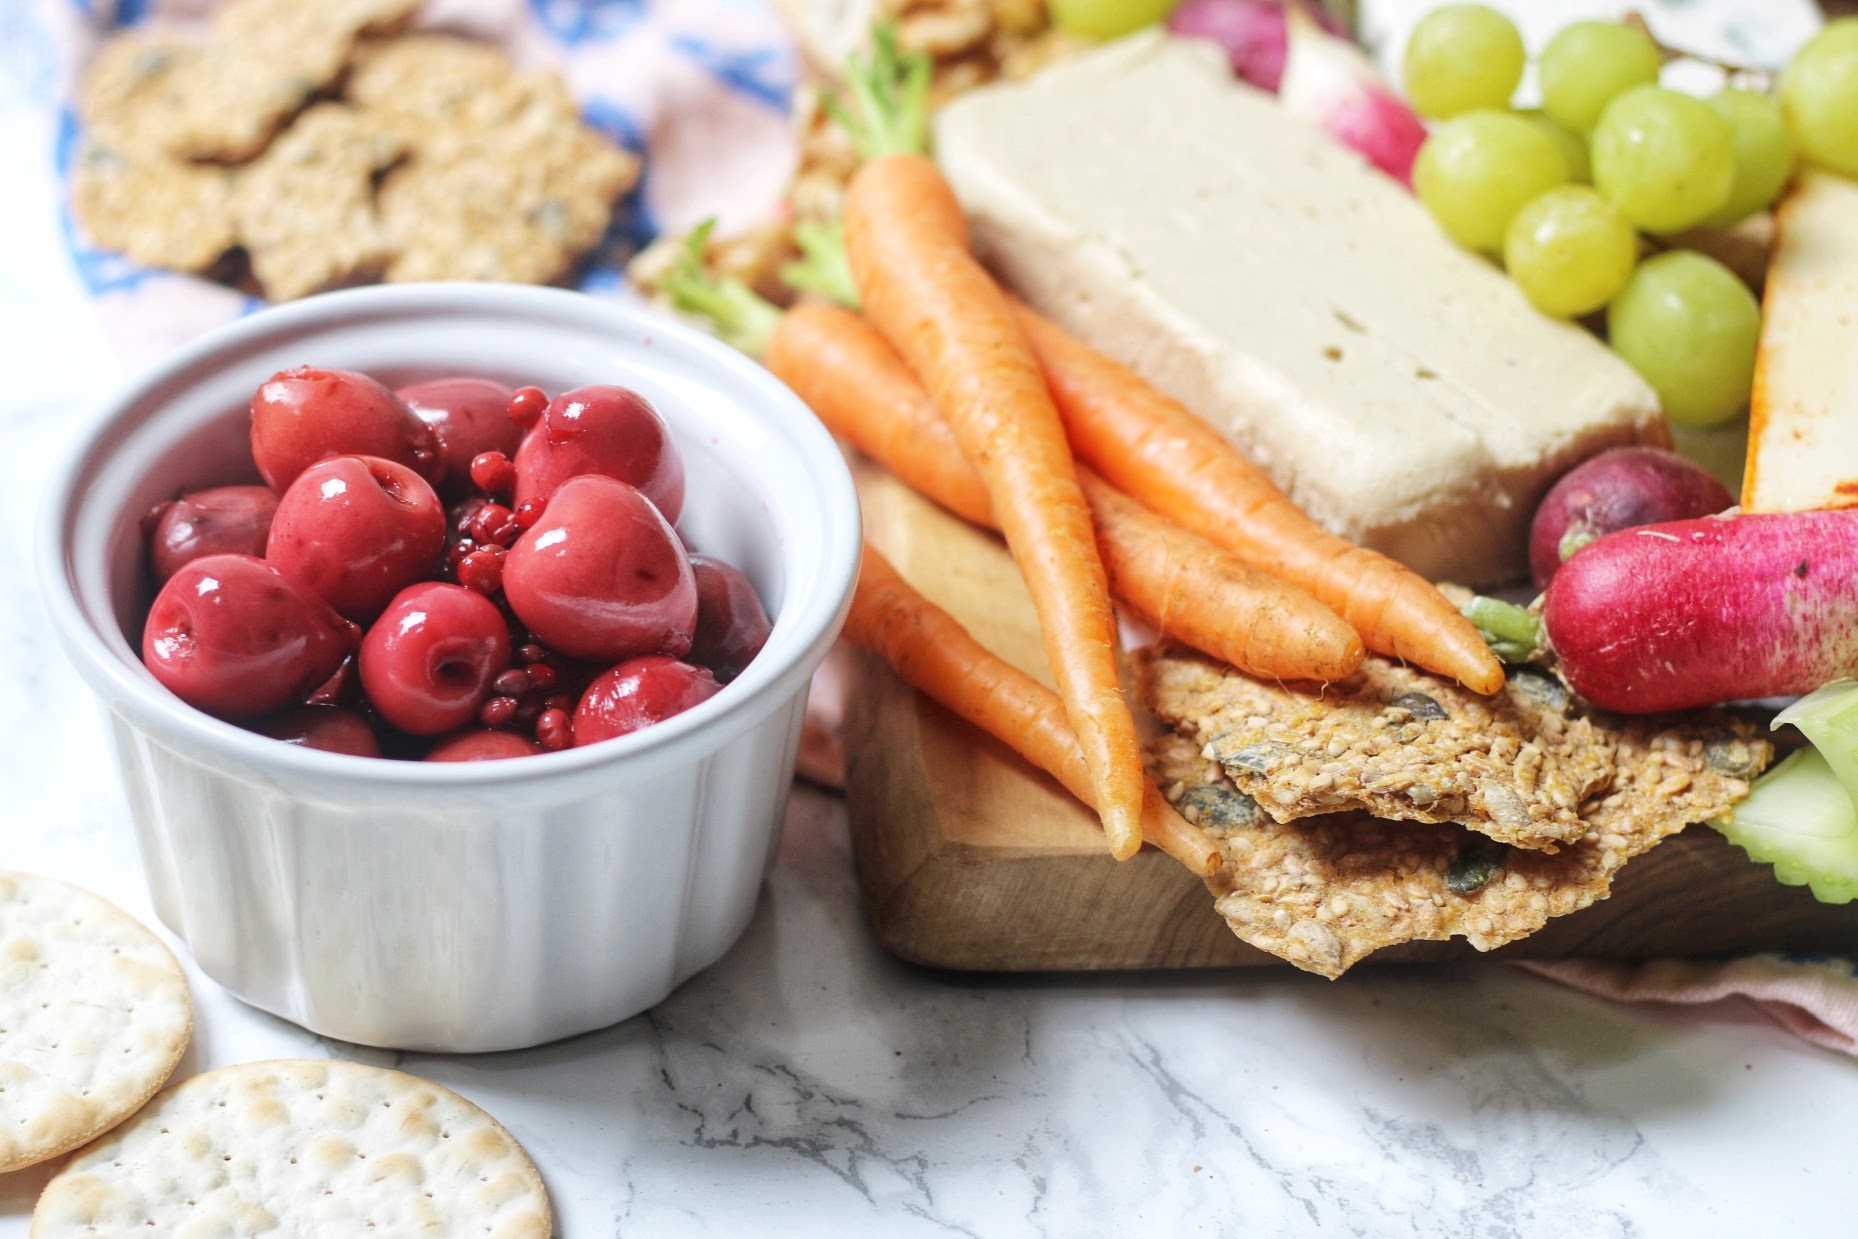 Vegan cheese served with pickled cherries, grapes, crackers and carrots